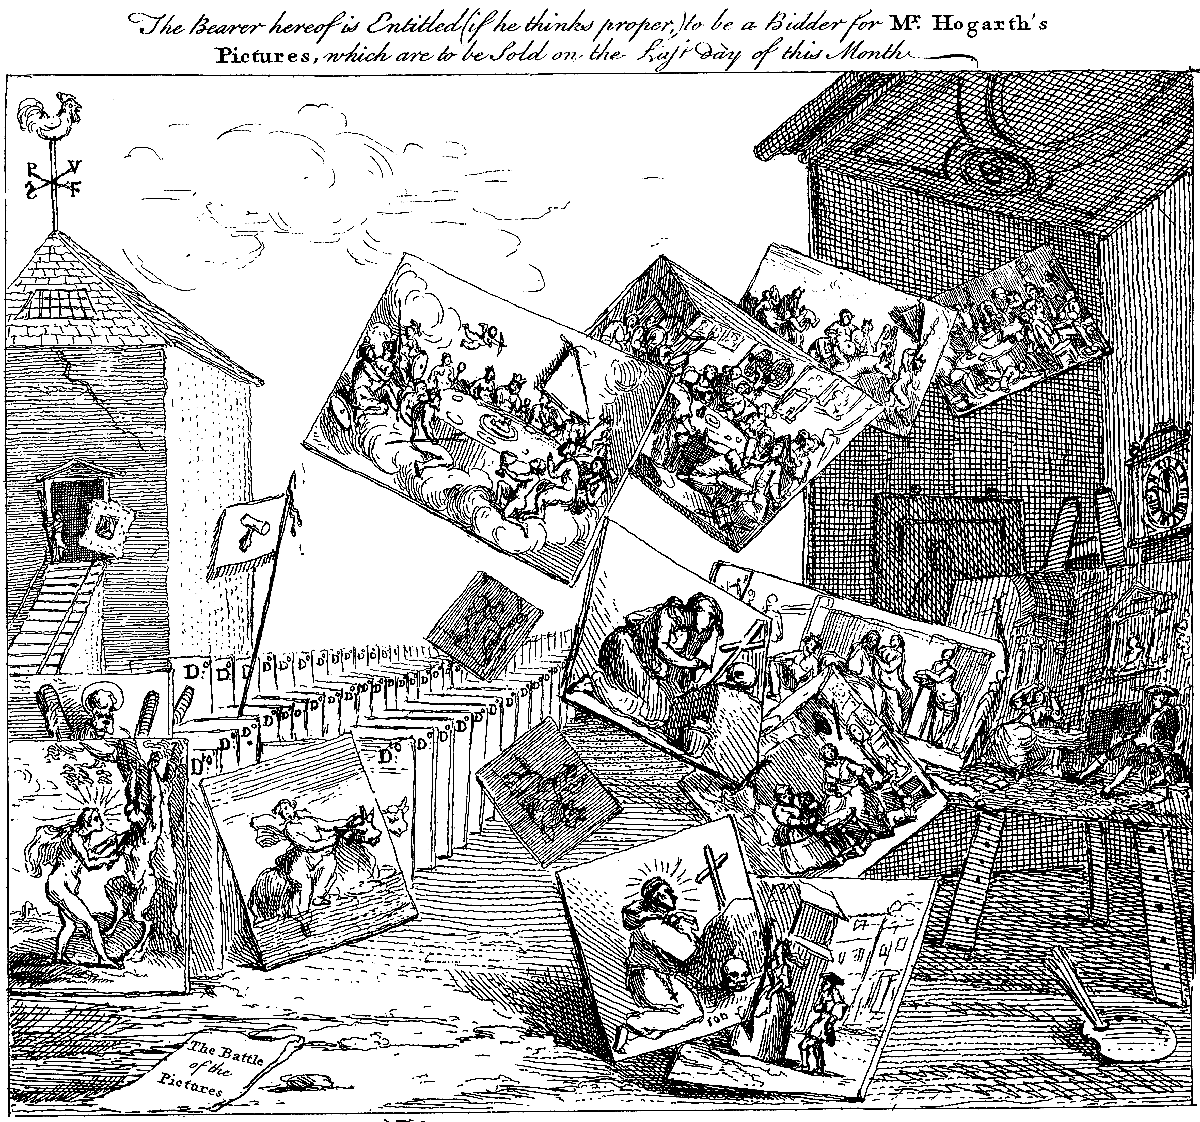 William Hogarth: Battle of the Pictures, 1744